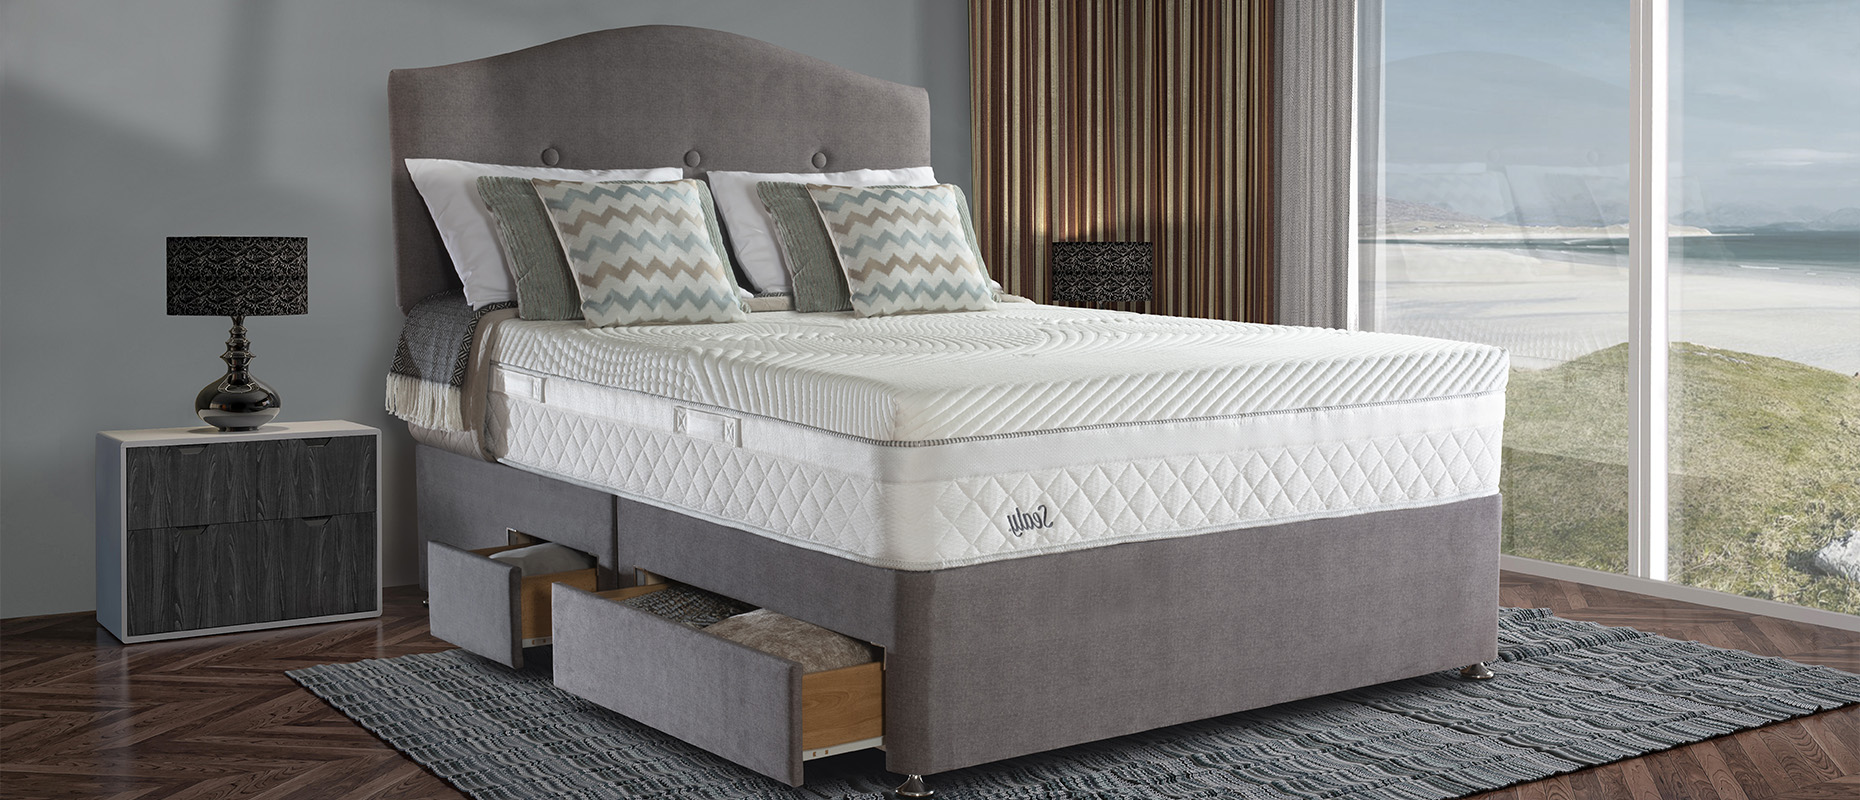 King Size Beds and Mattresses at Forrest Furnishing